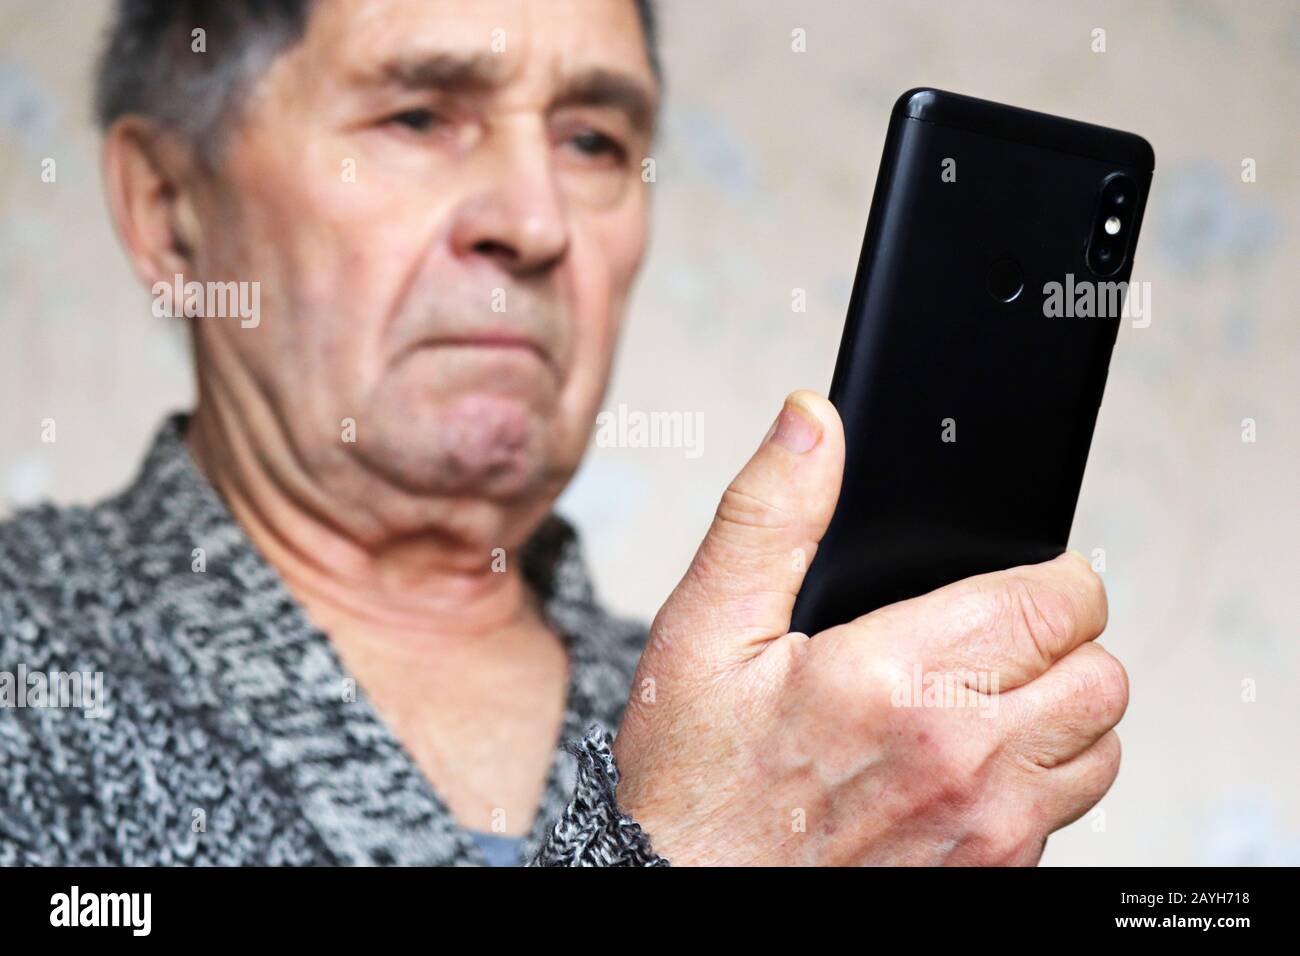 Elderly man using smartphone, mobile phone in male hands close up. Concept of online communication in retirement, sms, social media Stock Photo